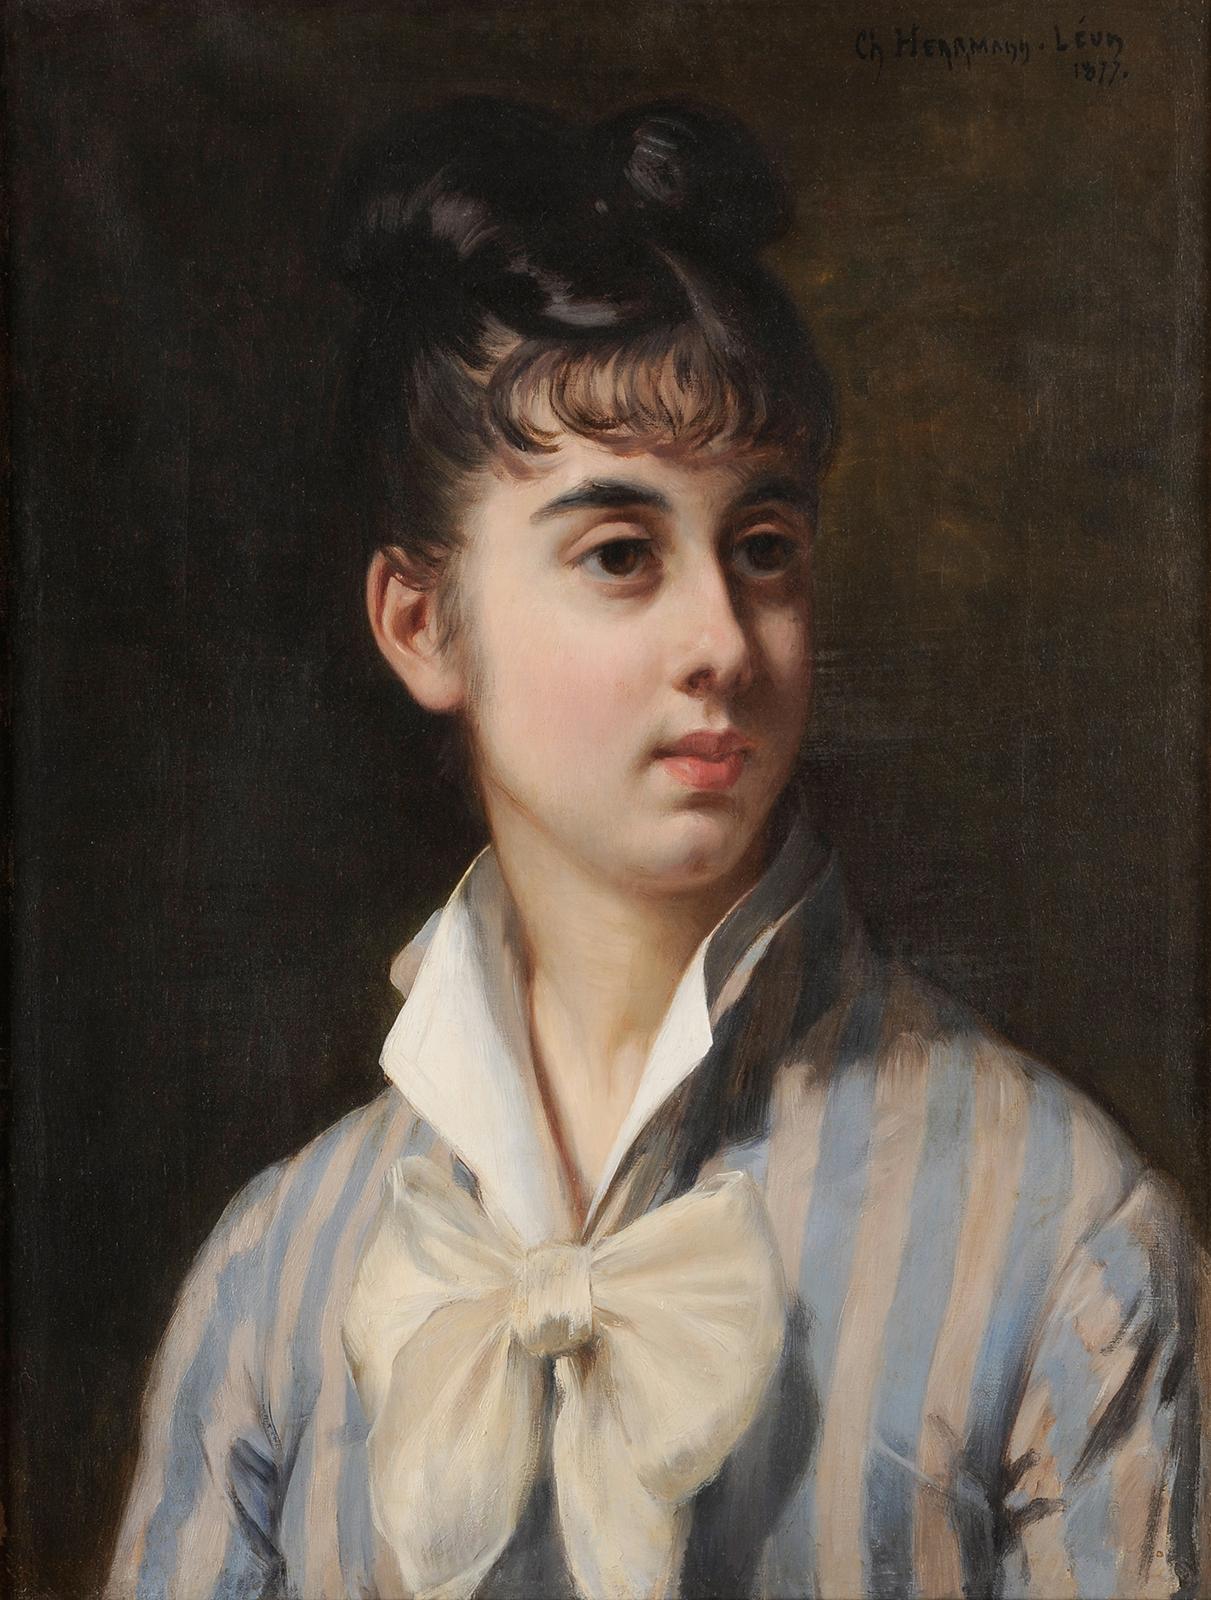 Young woman portrait with a white bow - Painting by Charles Hermann-Léon